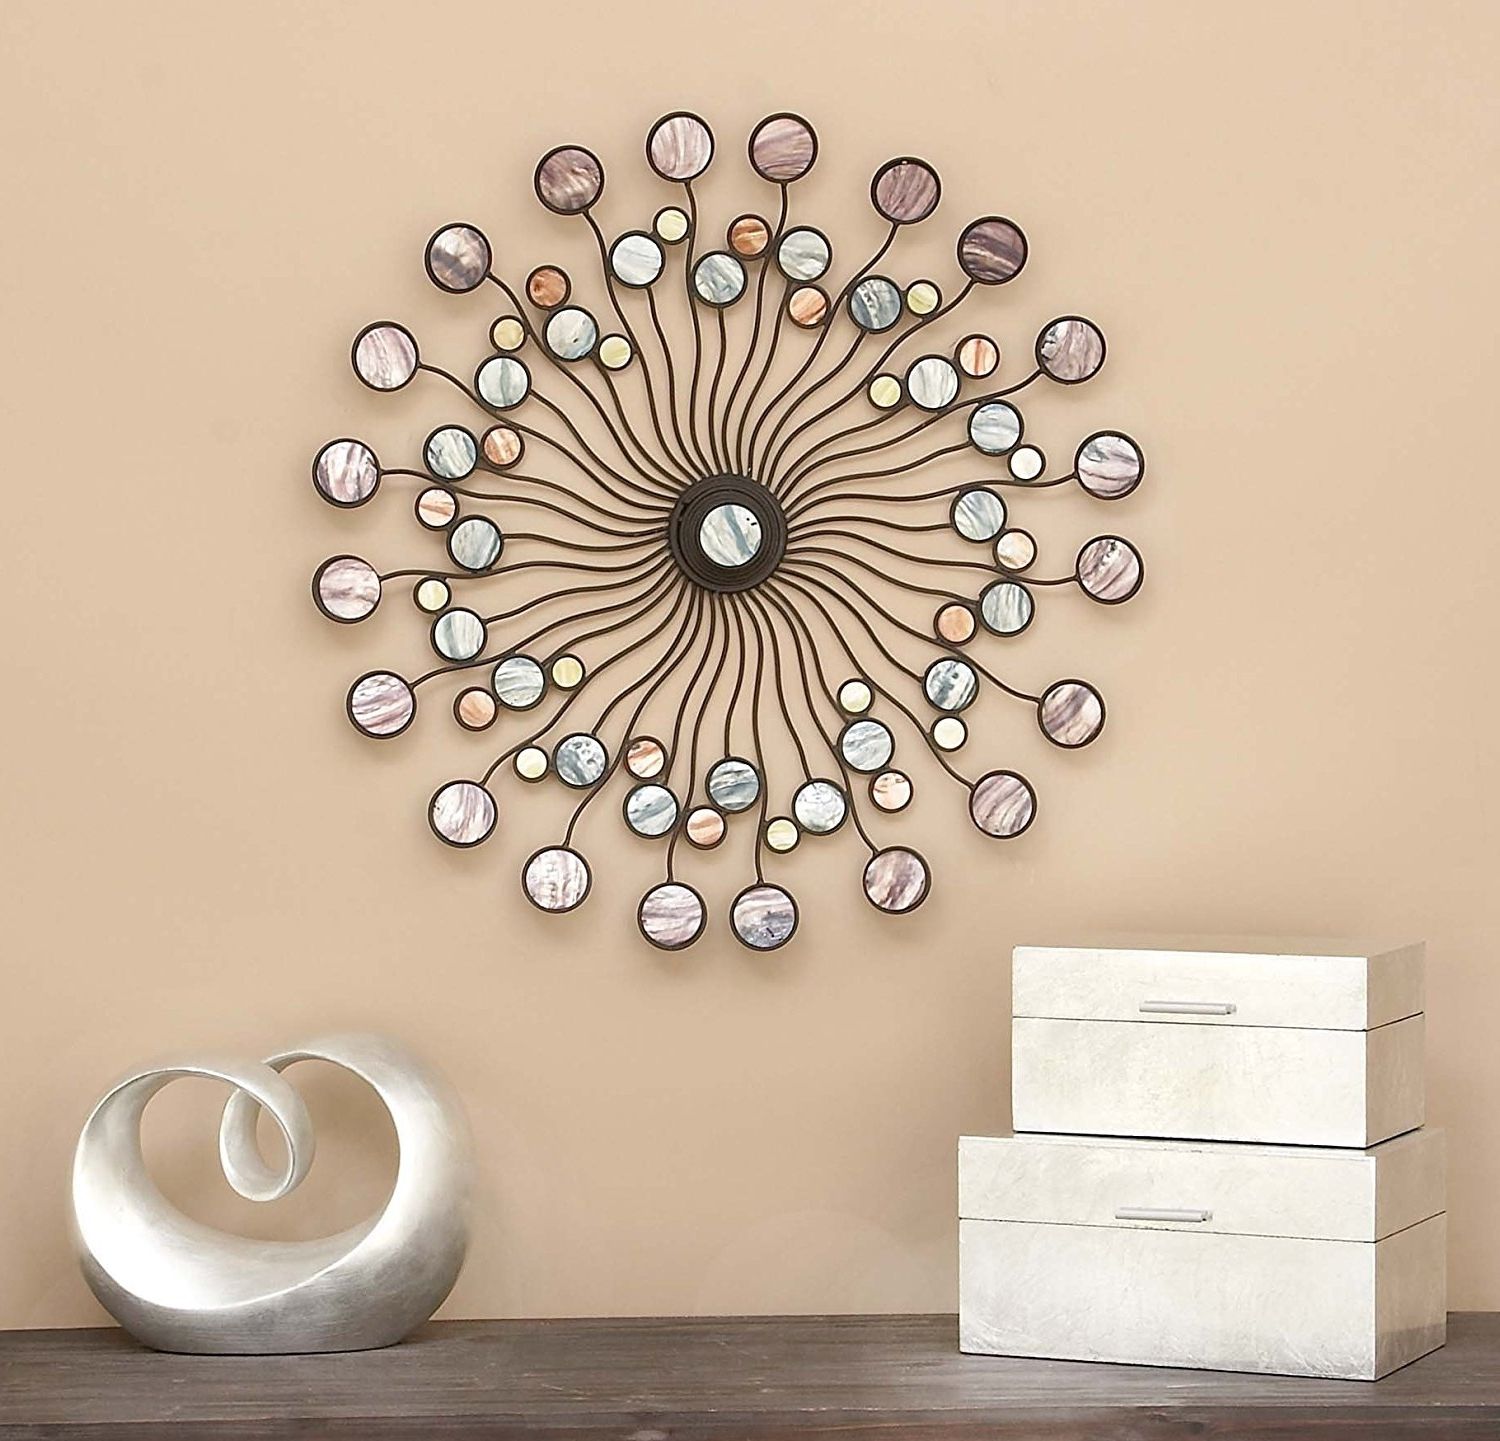 Amazon: Deco 79 13533 Metal Wall Decor: Home & Kitchen With Regard To Best And Newest Amazon Wall Accents (View 13 of 15)